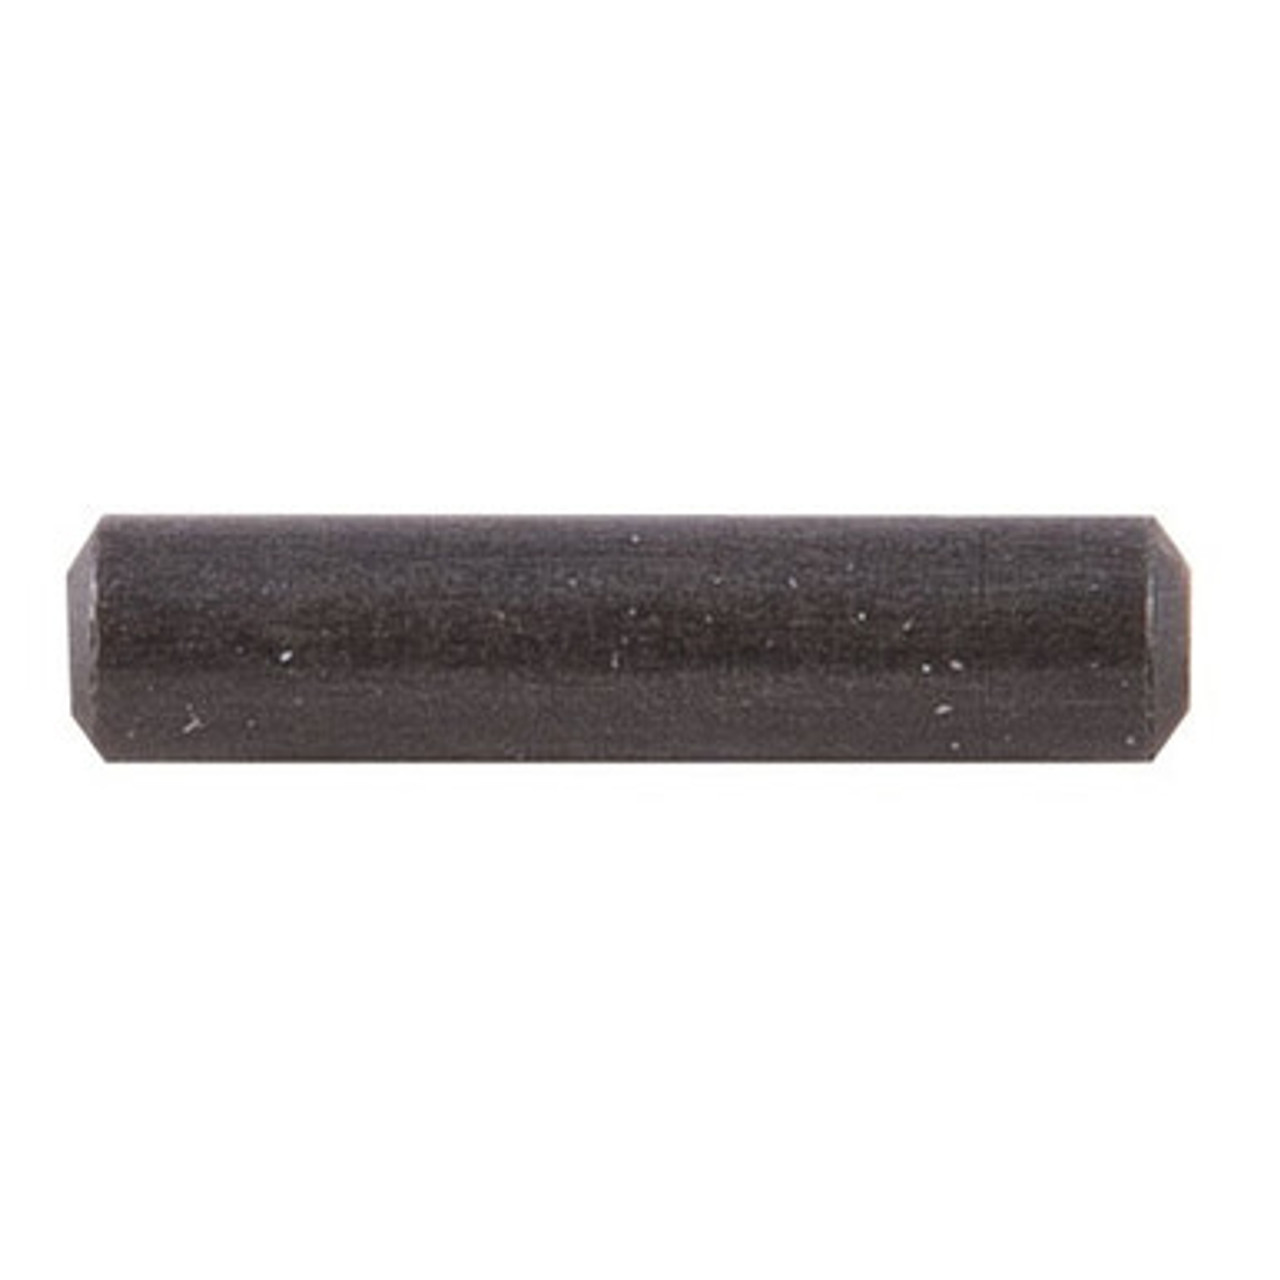 Colt M16/M4/AR15 Extractor Pin